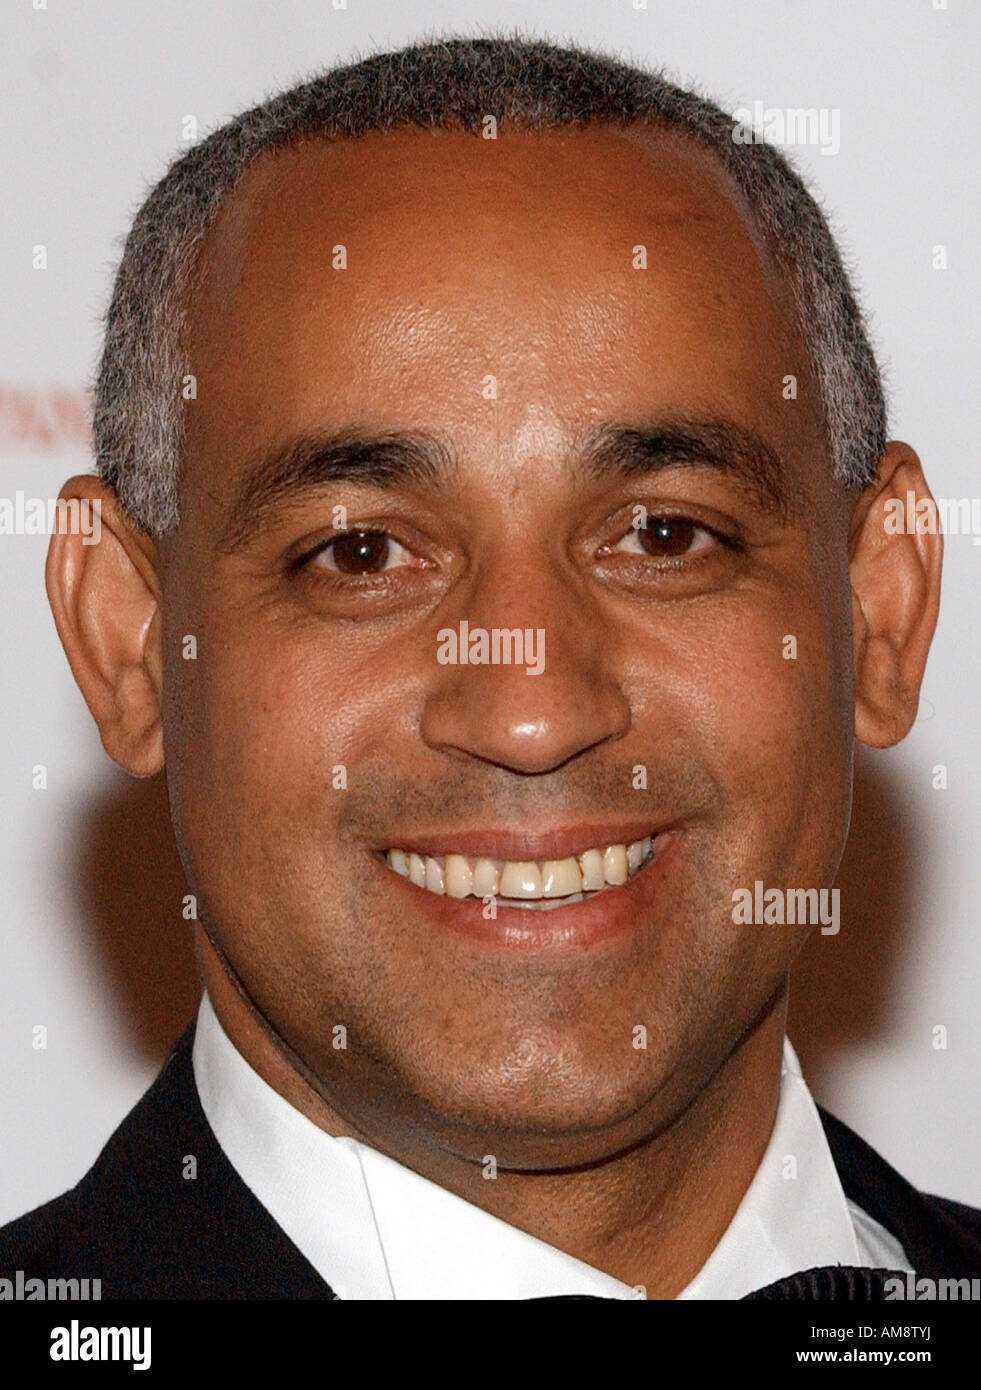 Honoree Omar Minaya for Sports stand for photos before the Hispanic Heritage Awards at the Kennedy Center in Washington DC Stock Photo